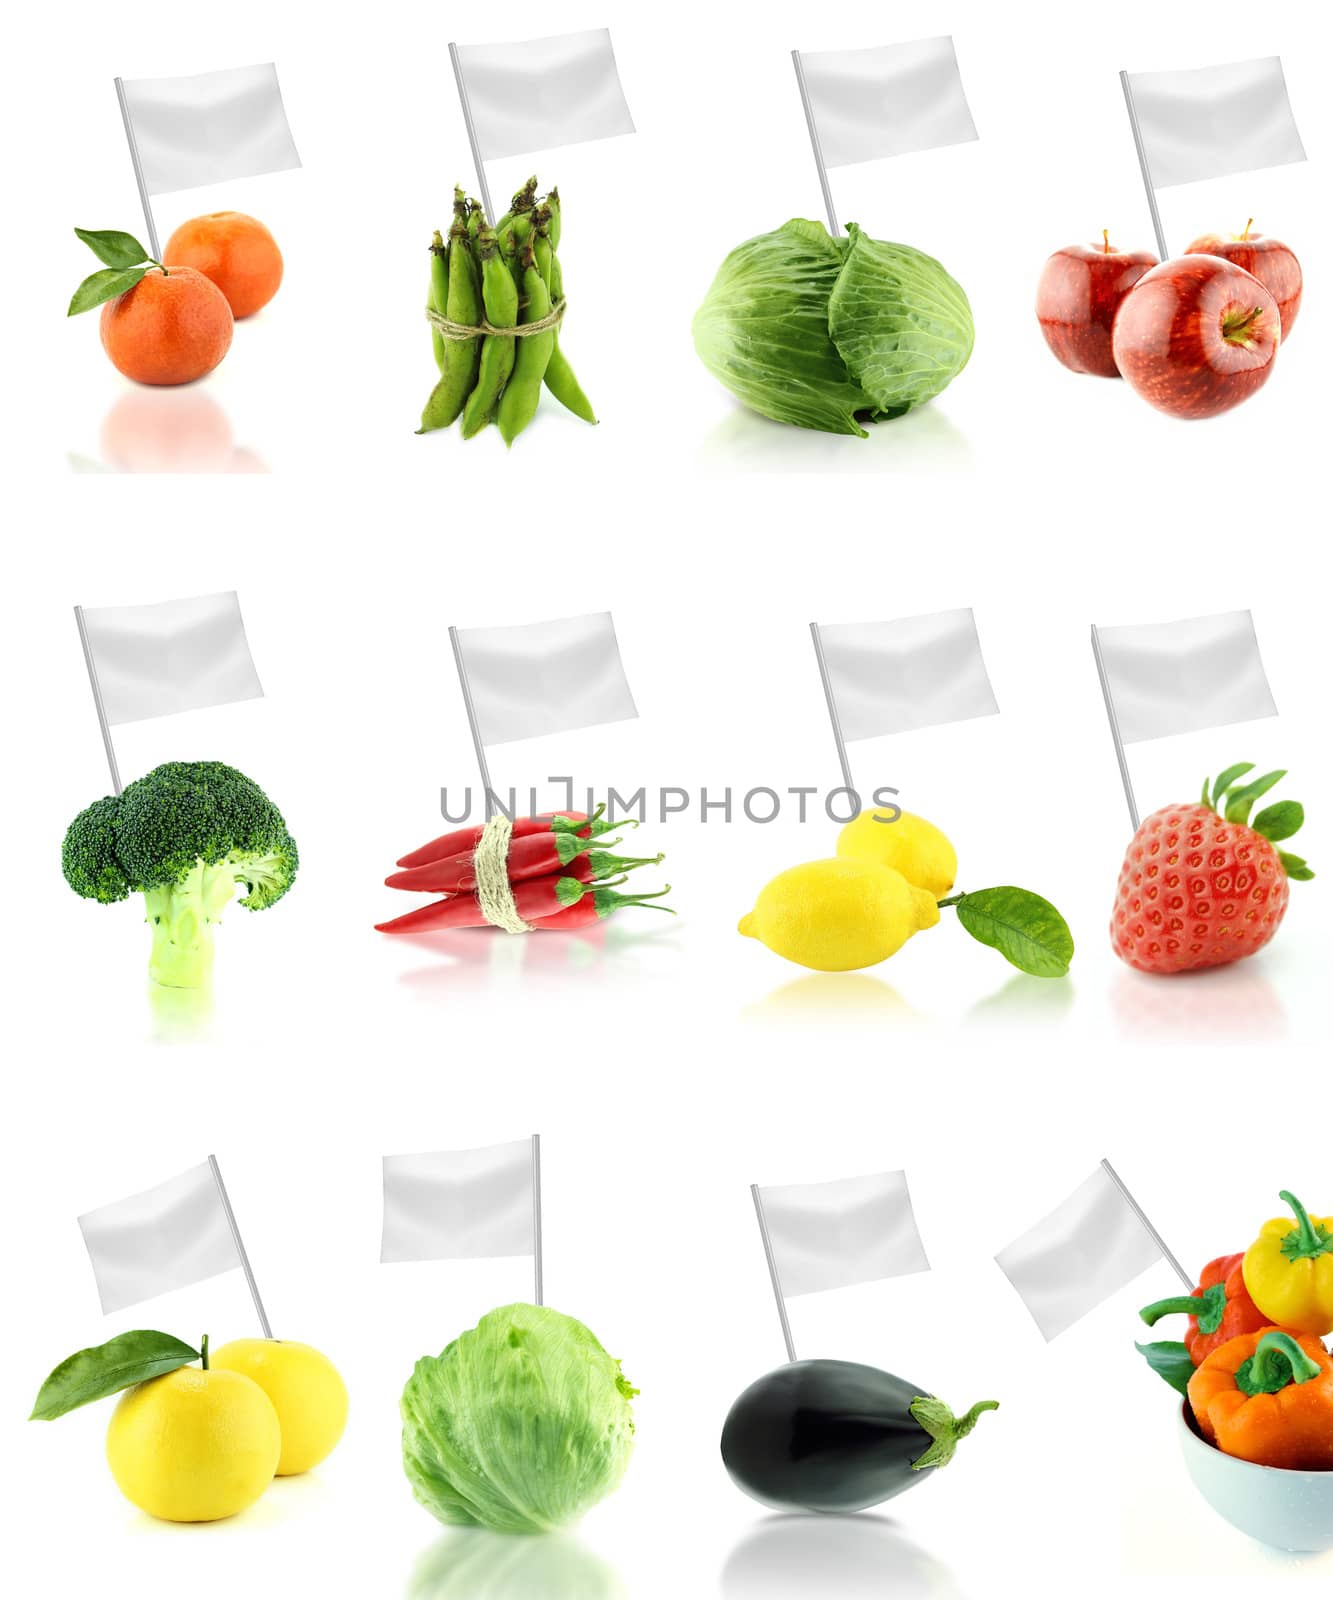 Healthy and organic food concept. Set of fresh fruits and vegetables with flag showing the benefits or the price of fruits.